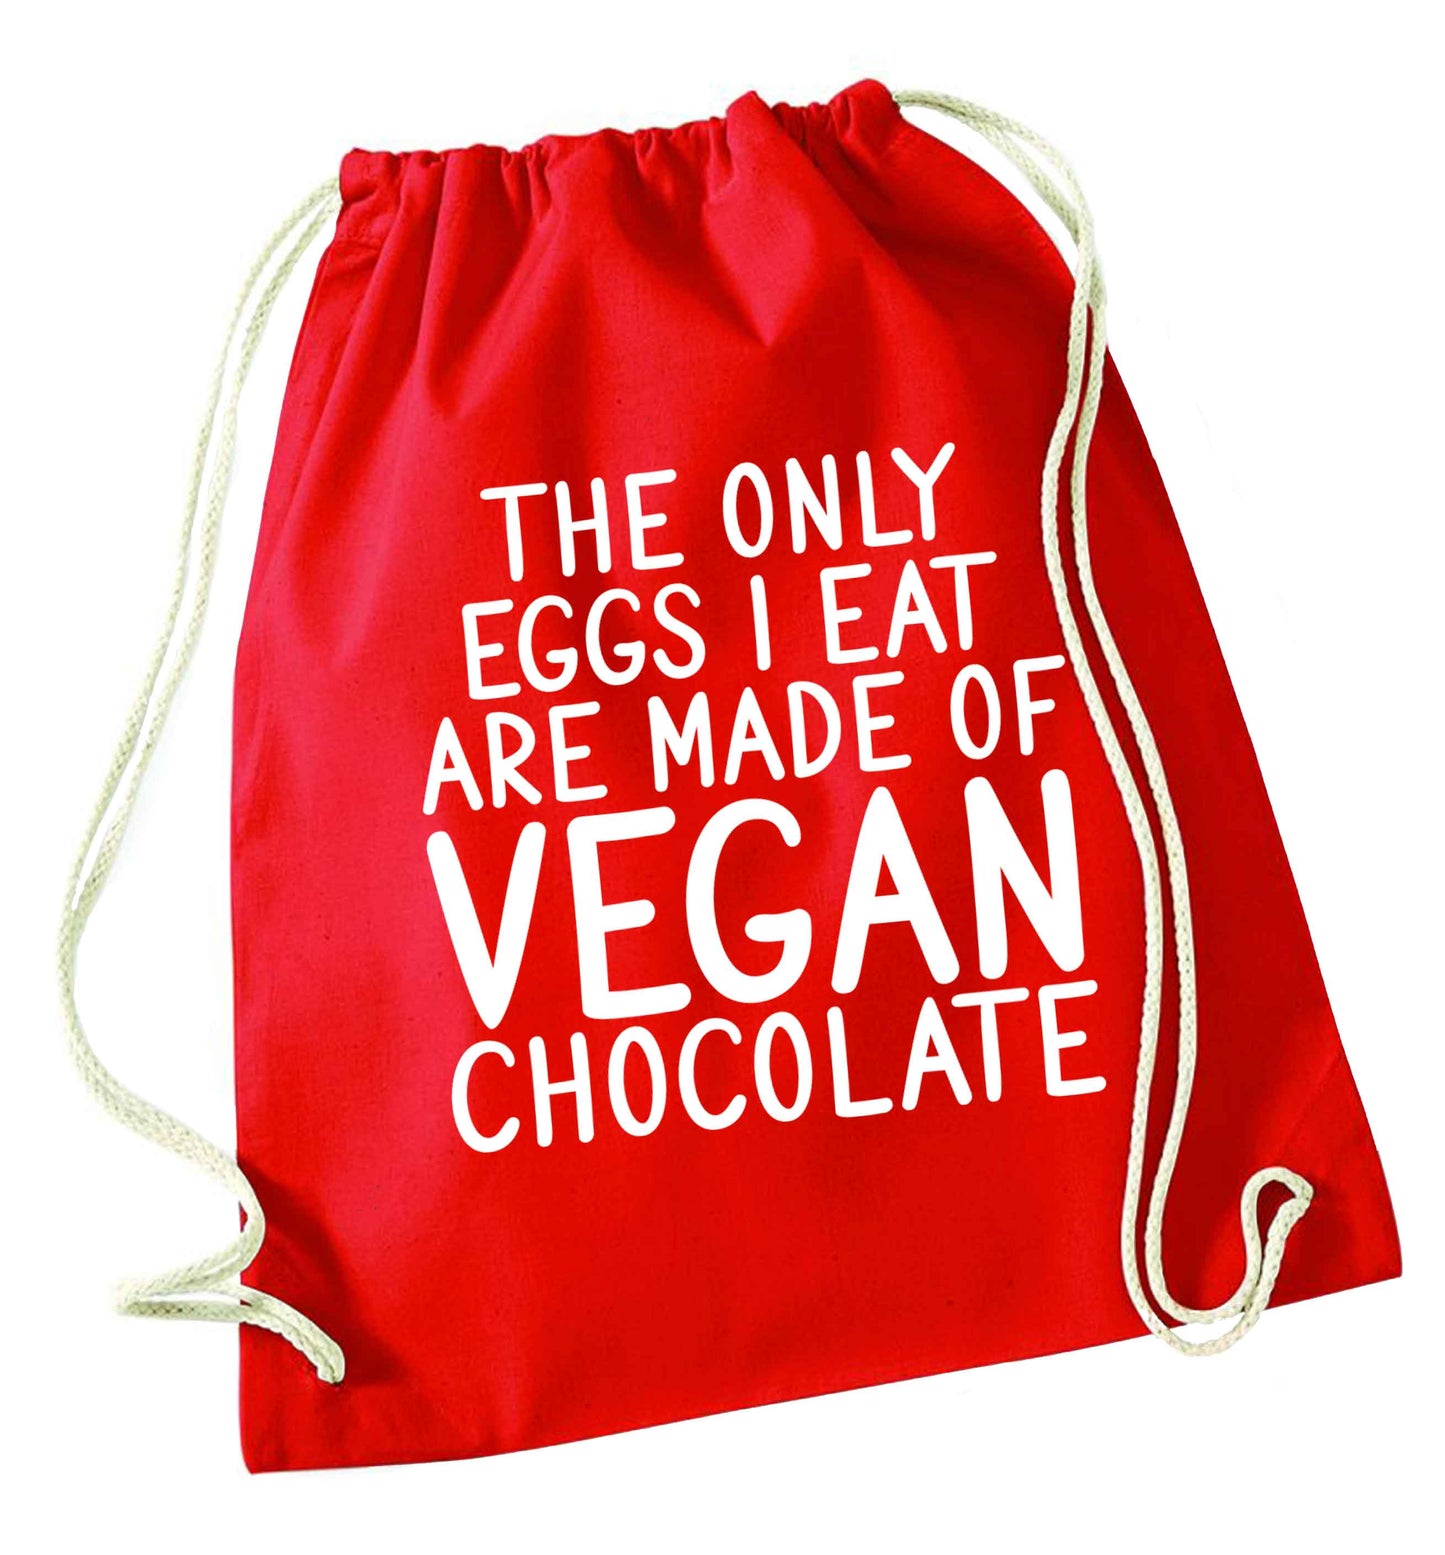 The only eggs I eat are made of vegan chocolate red drawstring bag 